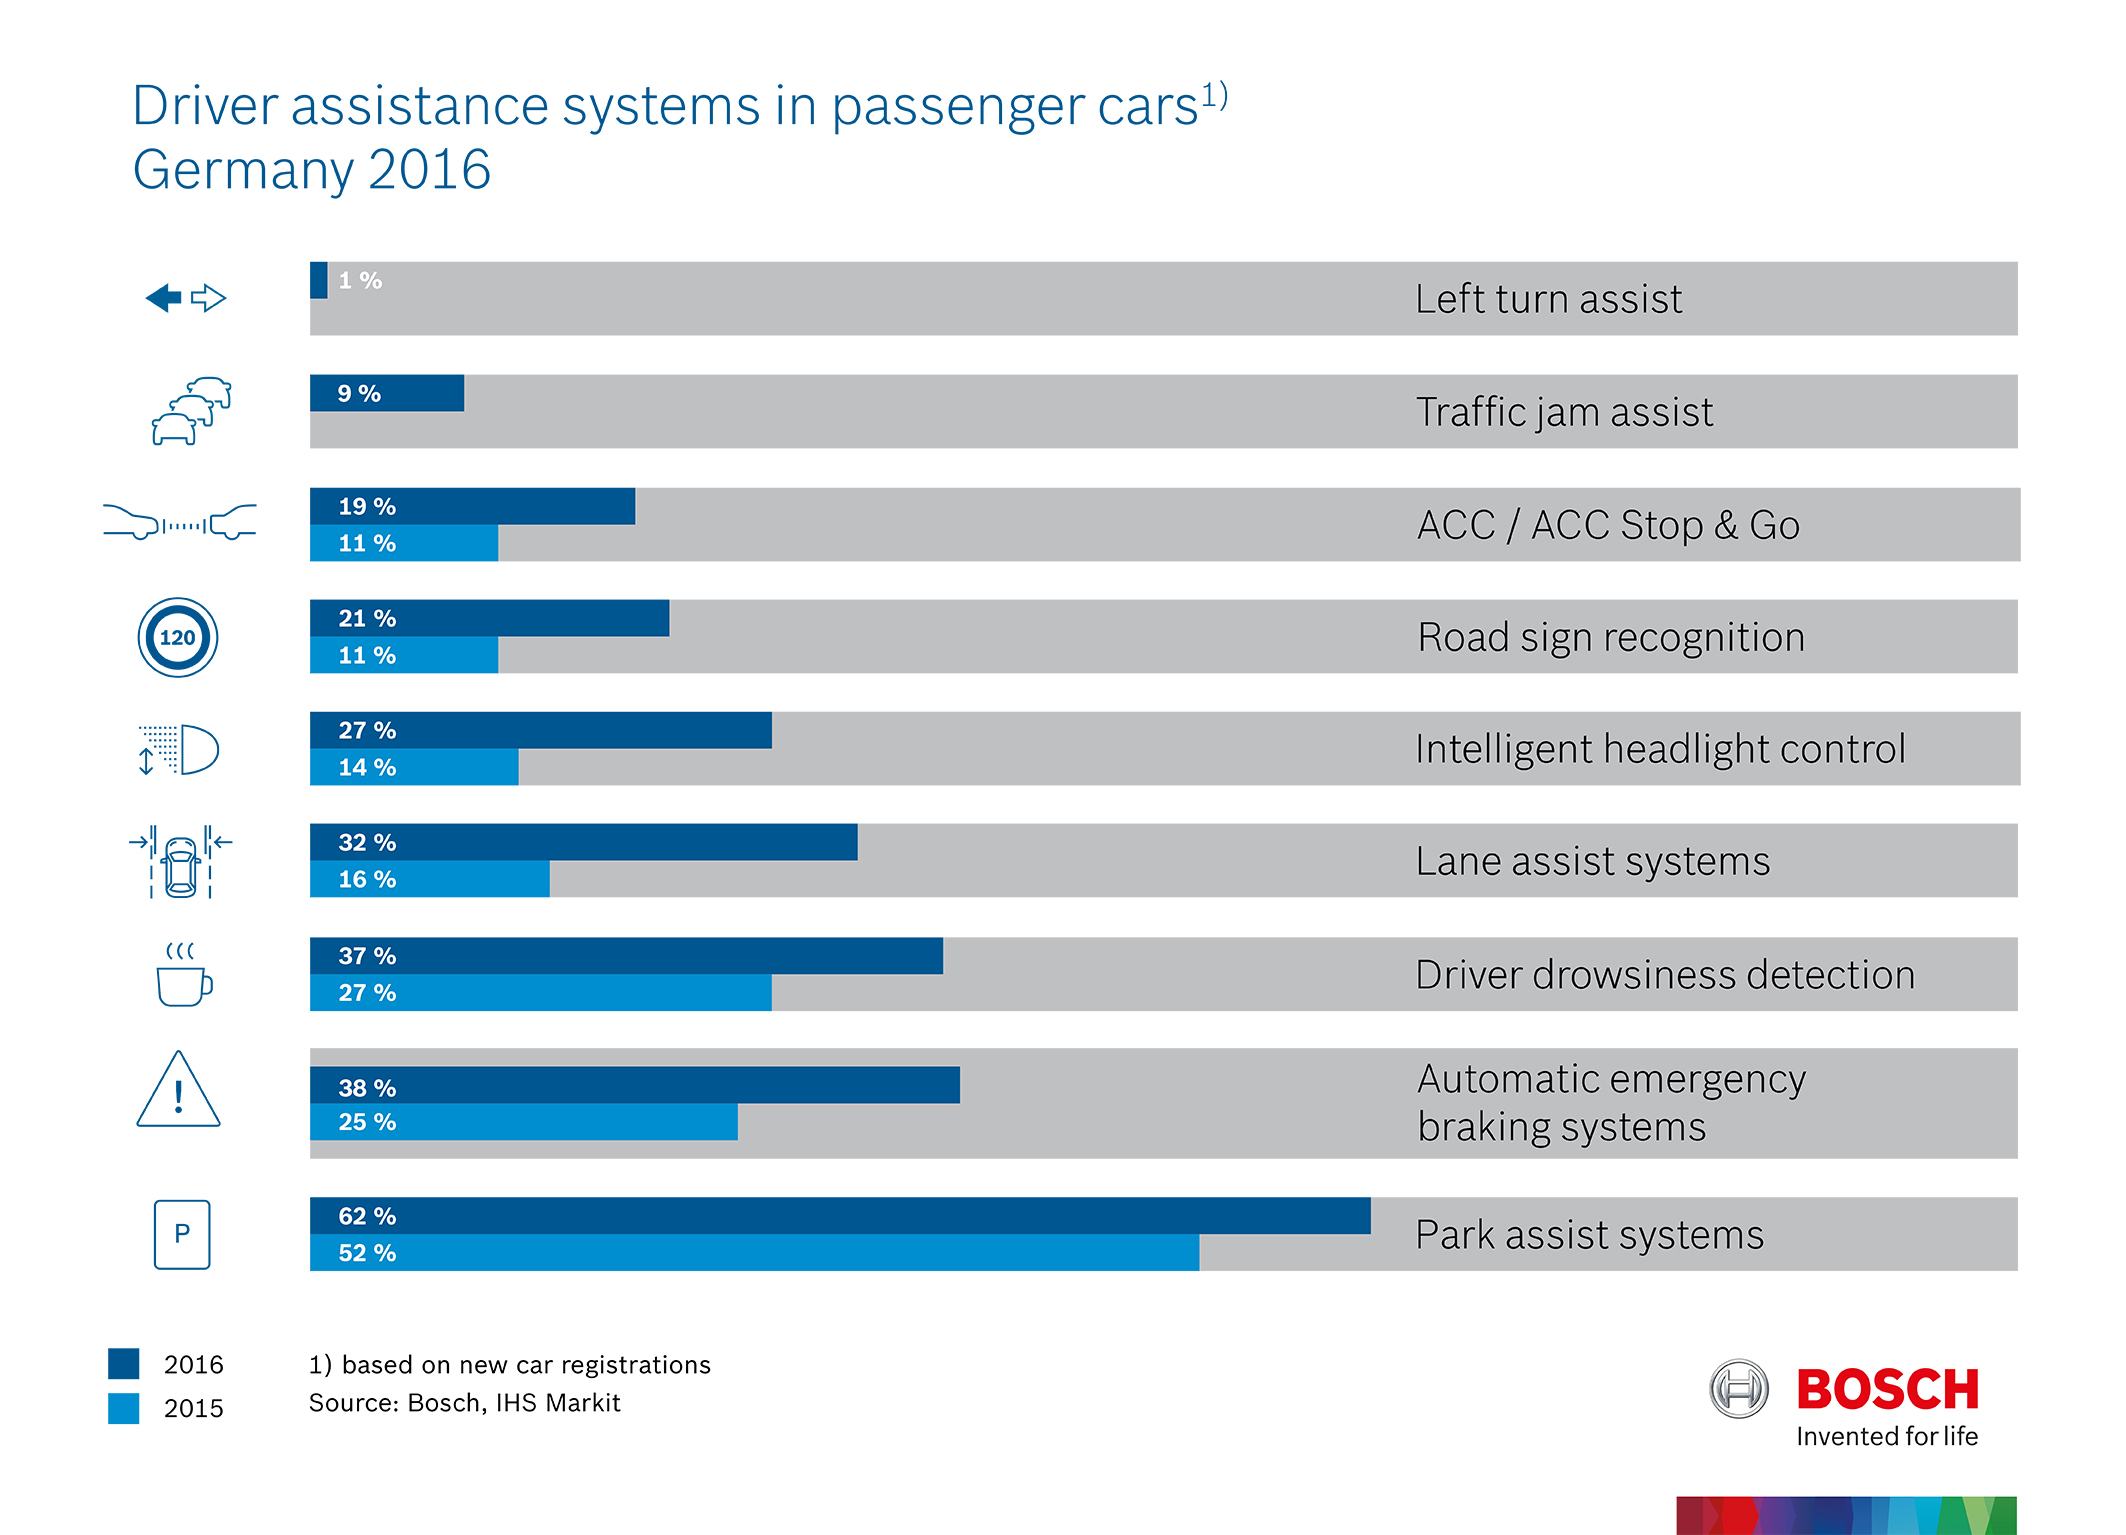 Driver assistance systems in passenger cars, Germany 2016